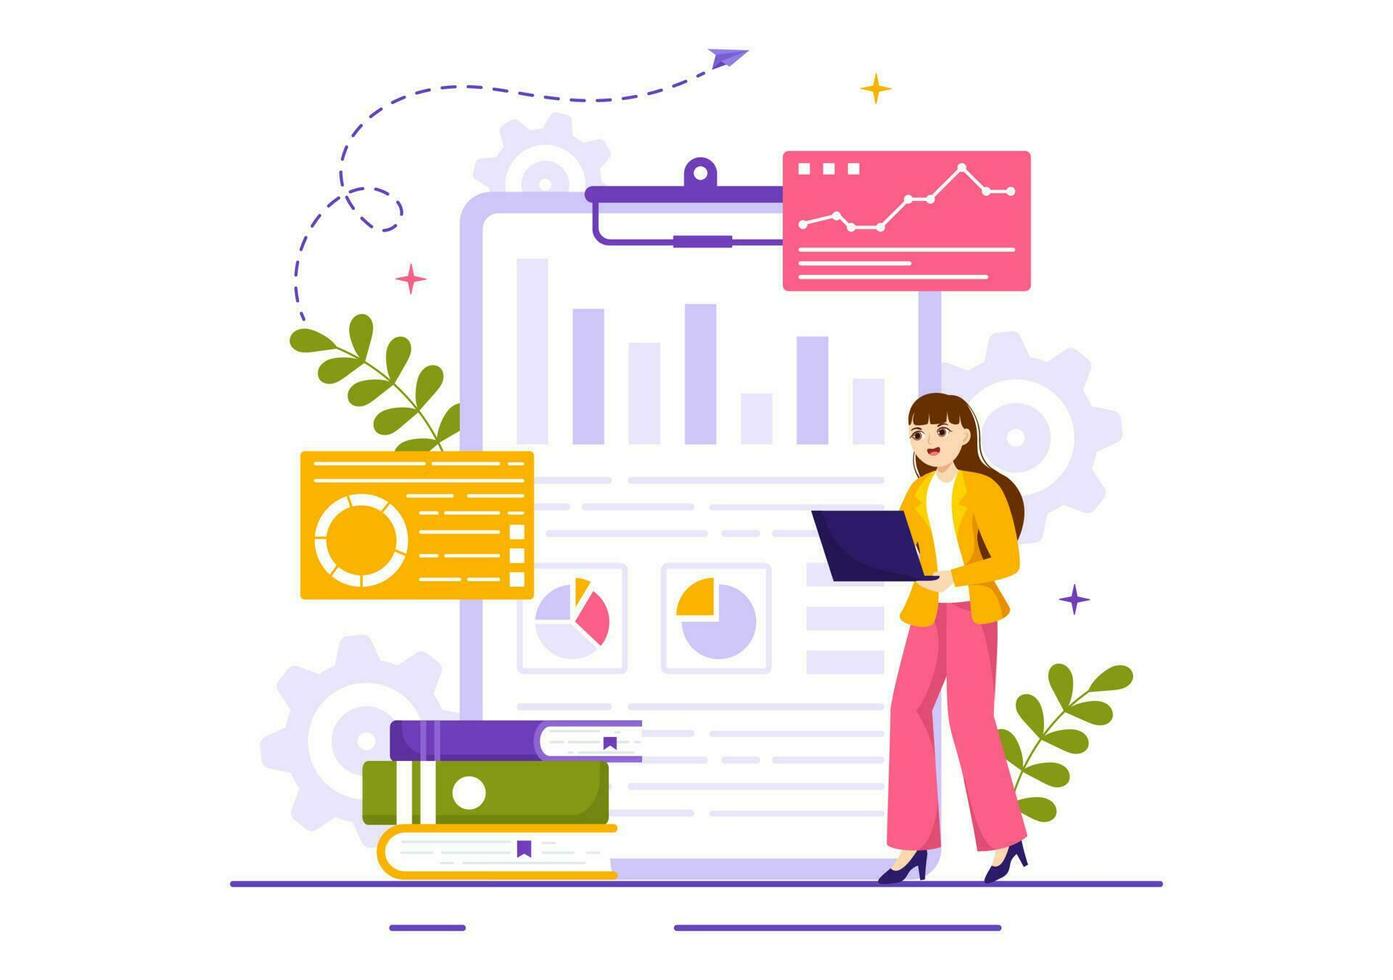 Market Research and Analysis Vector Illustration with Team Management and Analytics for Making Data Statistics in Flat Cartoon Hand Drawn Templates